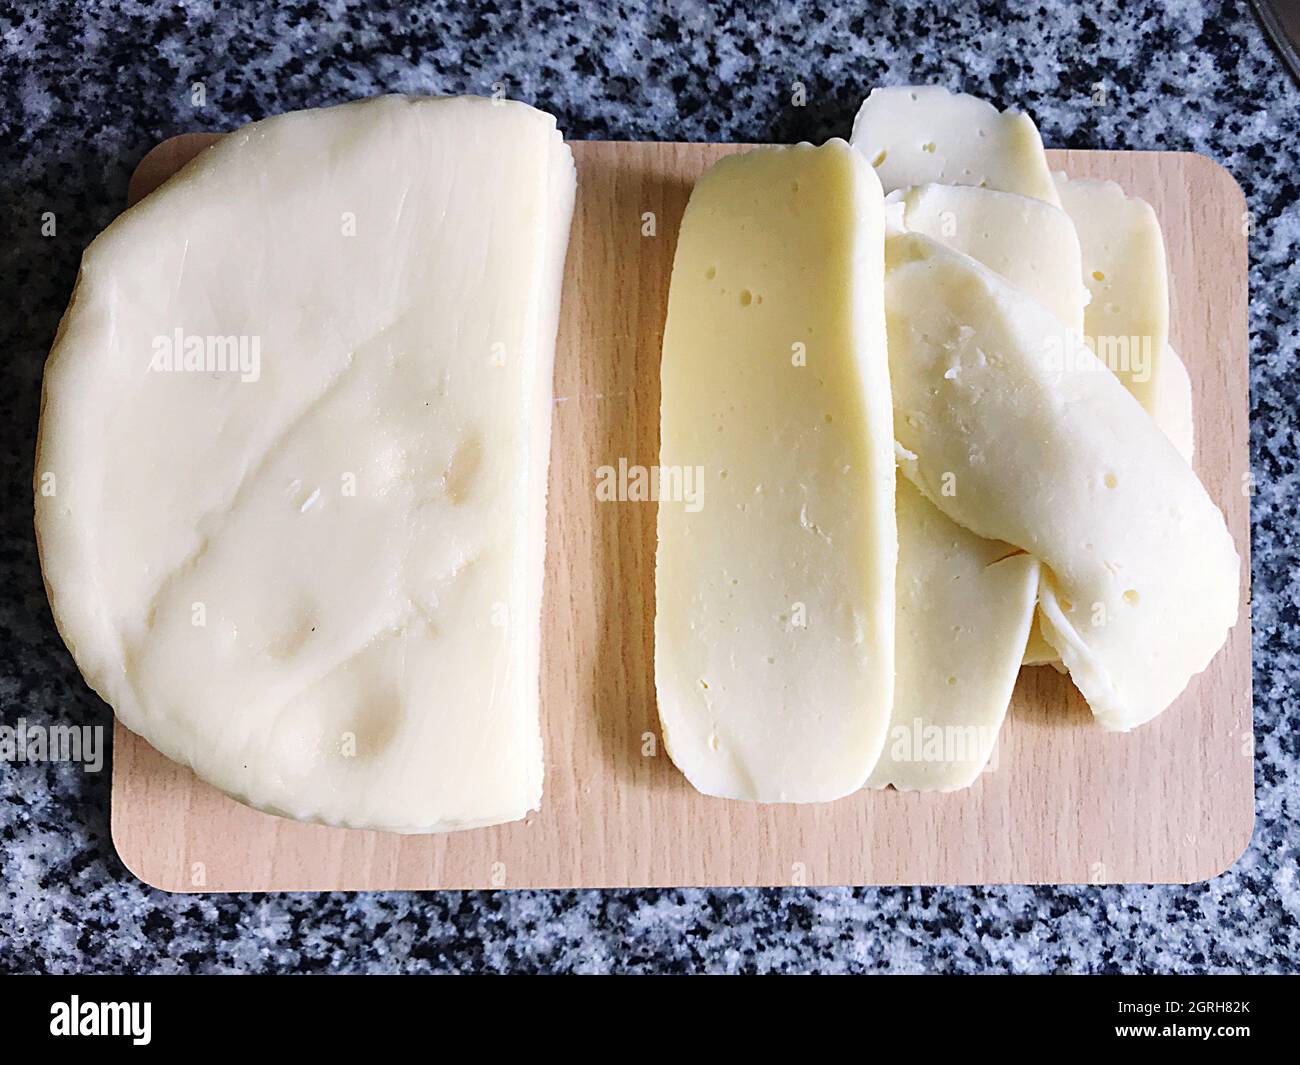 High Angle View Of Soft Cheese On Cutting Board Stock Photo